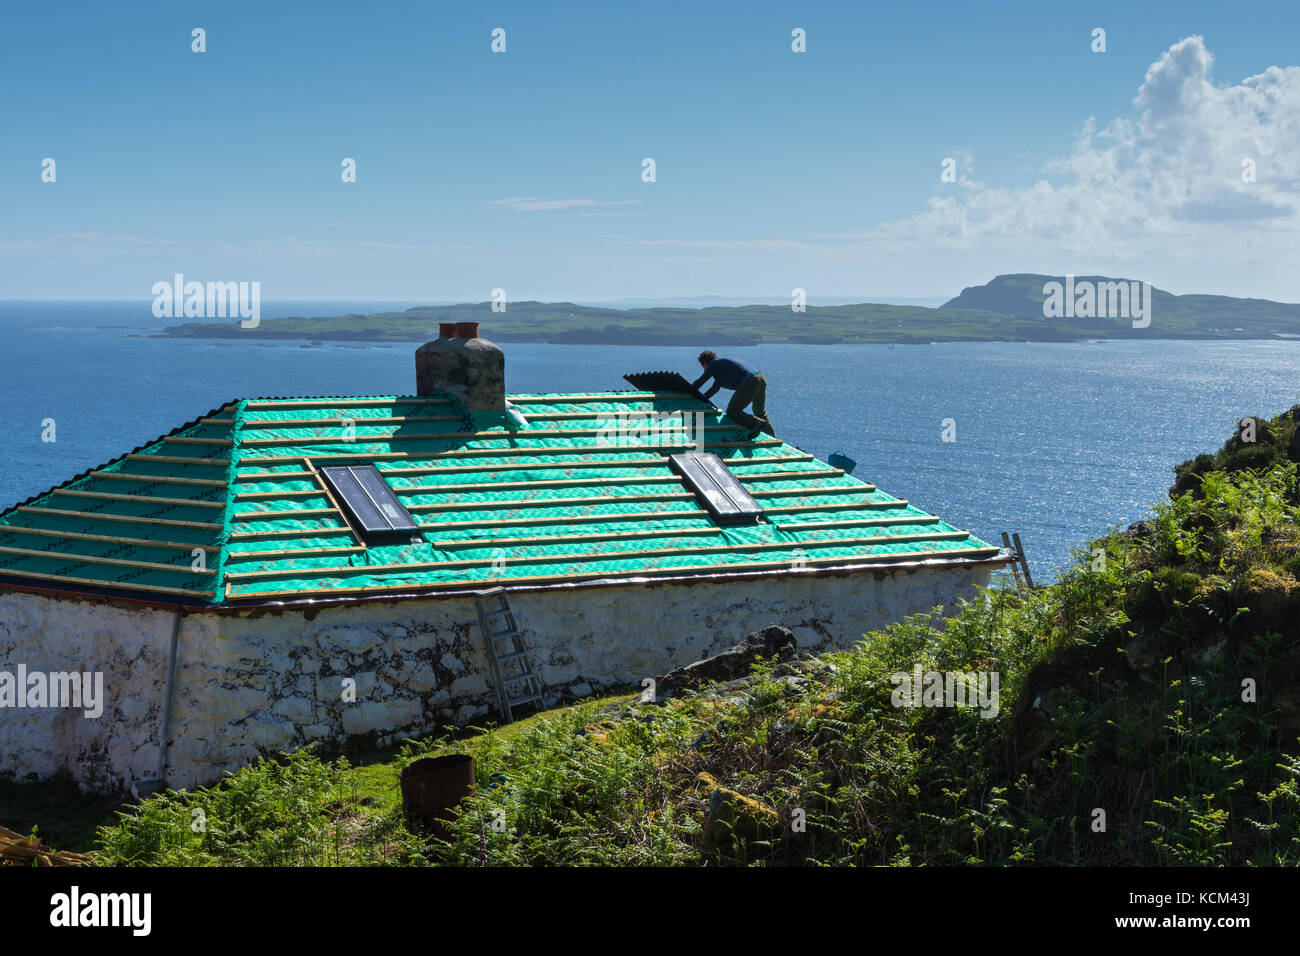 A worker restoring the roof of a cottage on the Isle of Eigg, Scotland, UK.  Behind is the Isle of Muck. Stock Photo